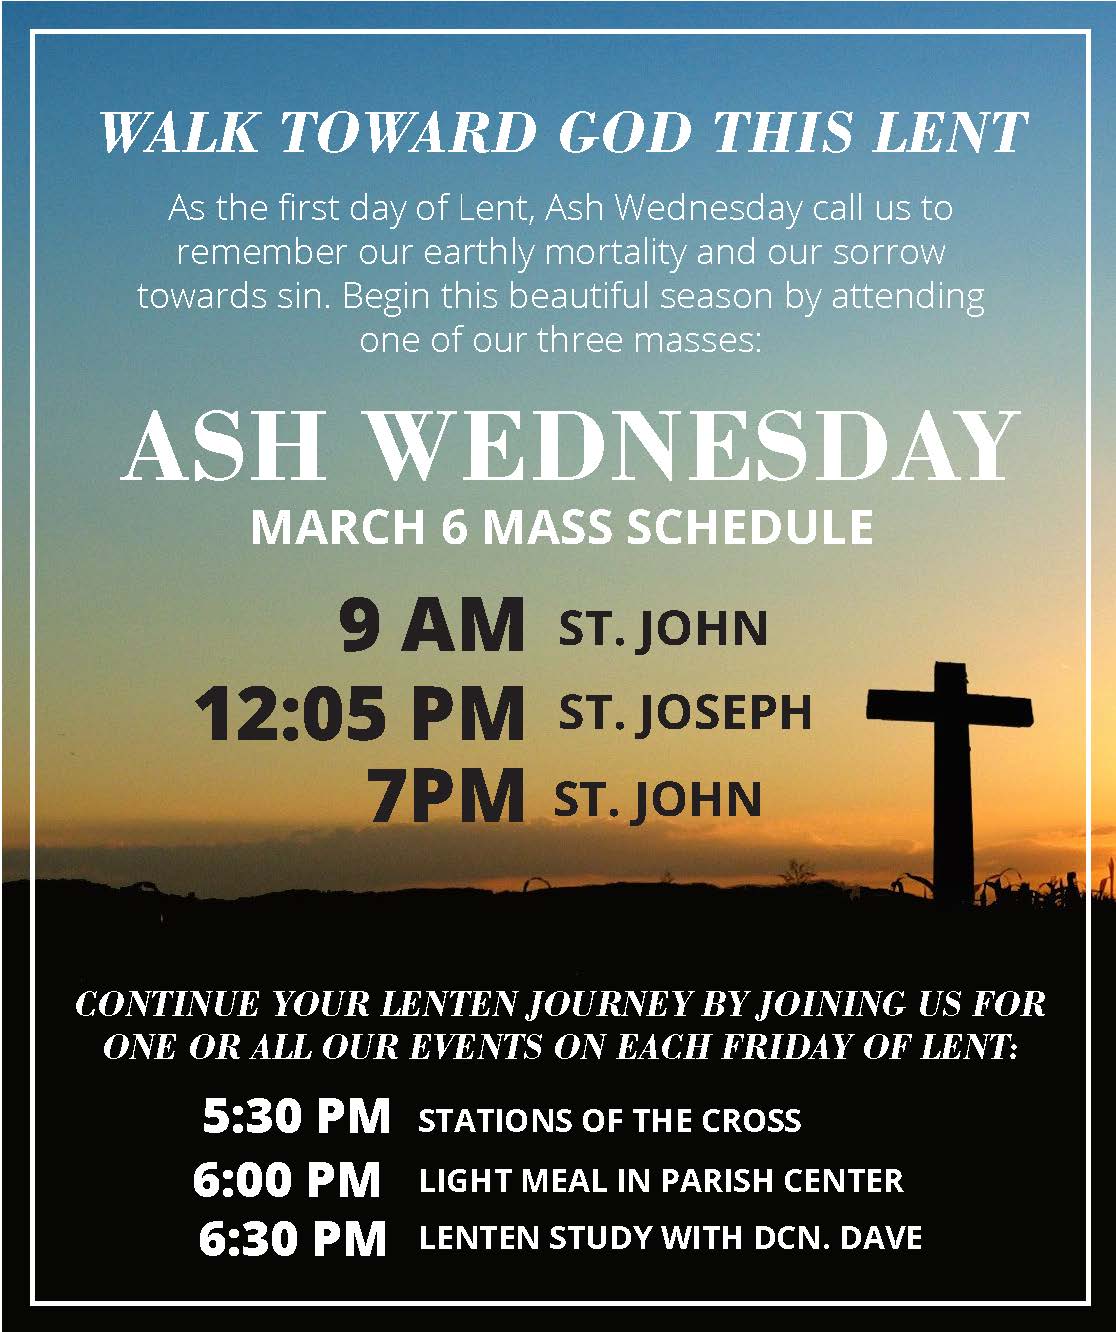 Ash Wednesday (The First Day Of Lent) - Ash Wednesday Quotes Wall Art